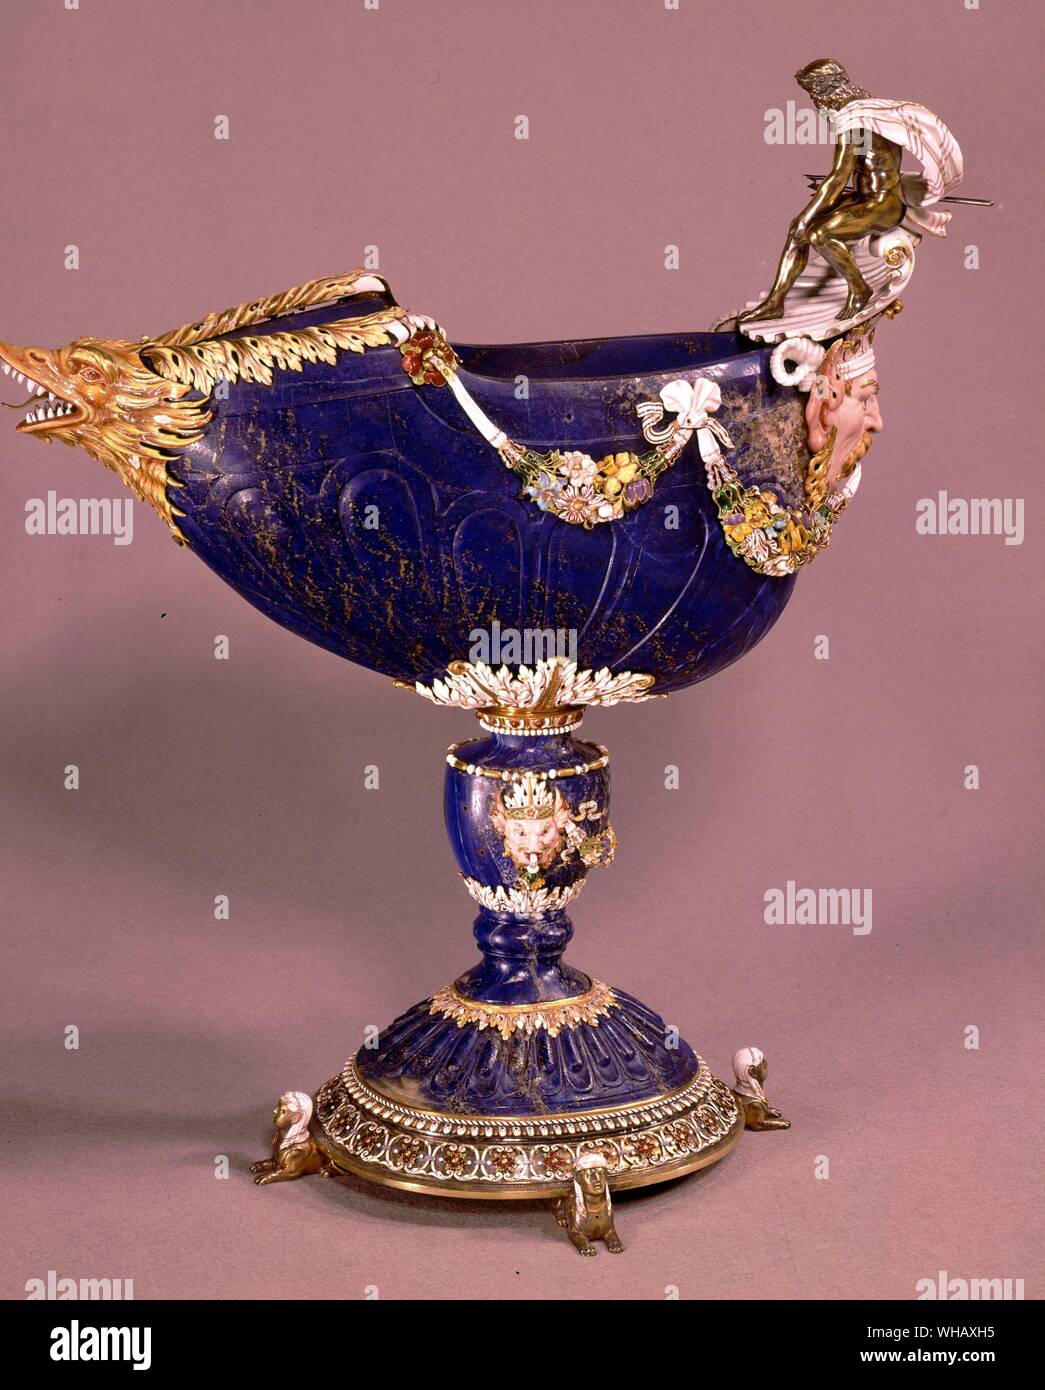 Cup in lapis lazuli surmounted by Neptune in silver garlands of ceramic and enamelled flowers. Sphinxs at base and exotic animals, from Louis XIV collection of jewels. The Sun King by Nancy Mitford, page 153. Stock Photo